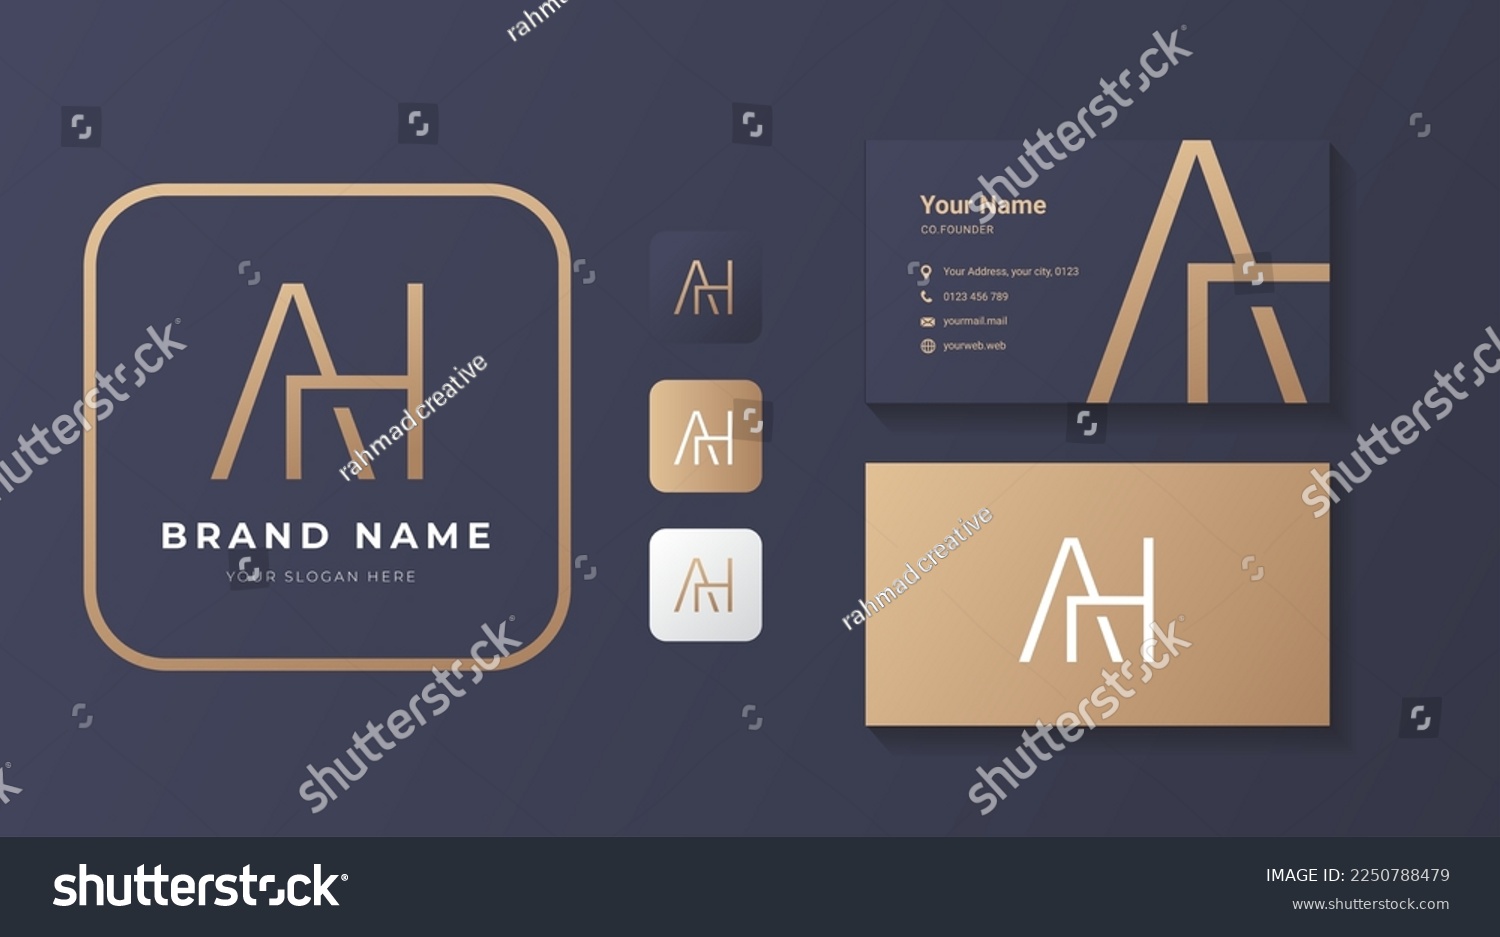 SVG of Premium letter AH logo with golden design. Luxury vector logo with business card template. Elegant corporate identity.
 svg